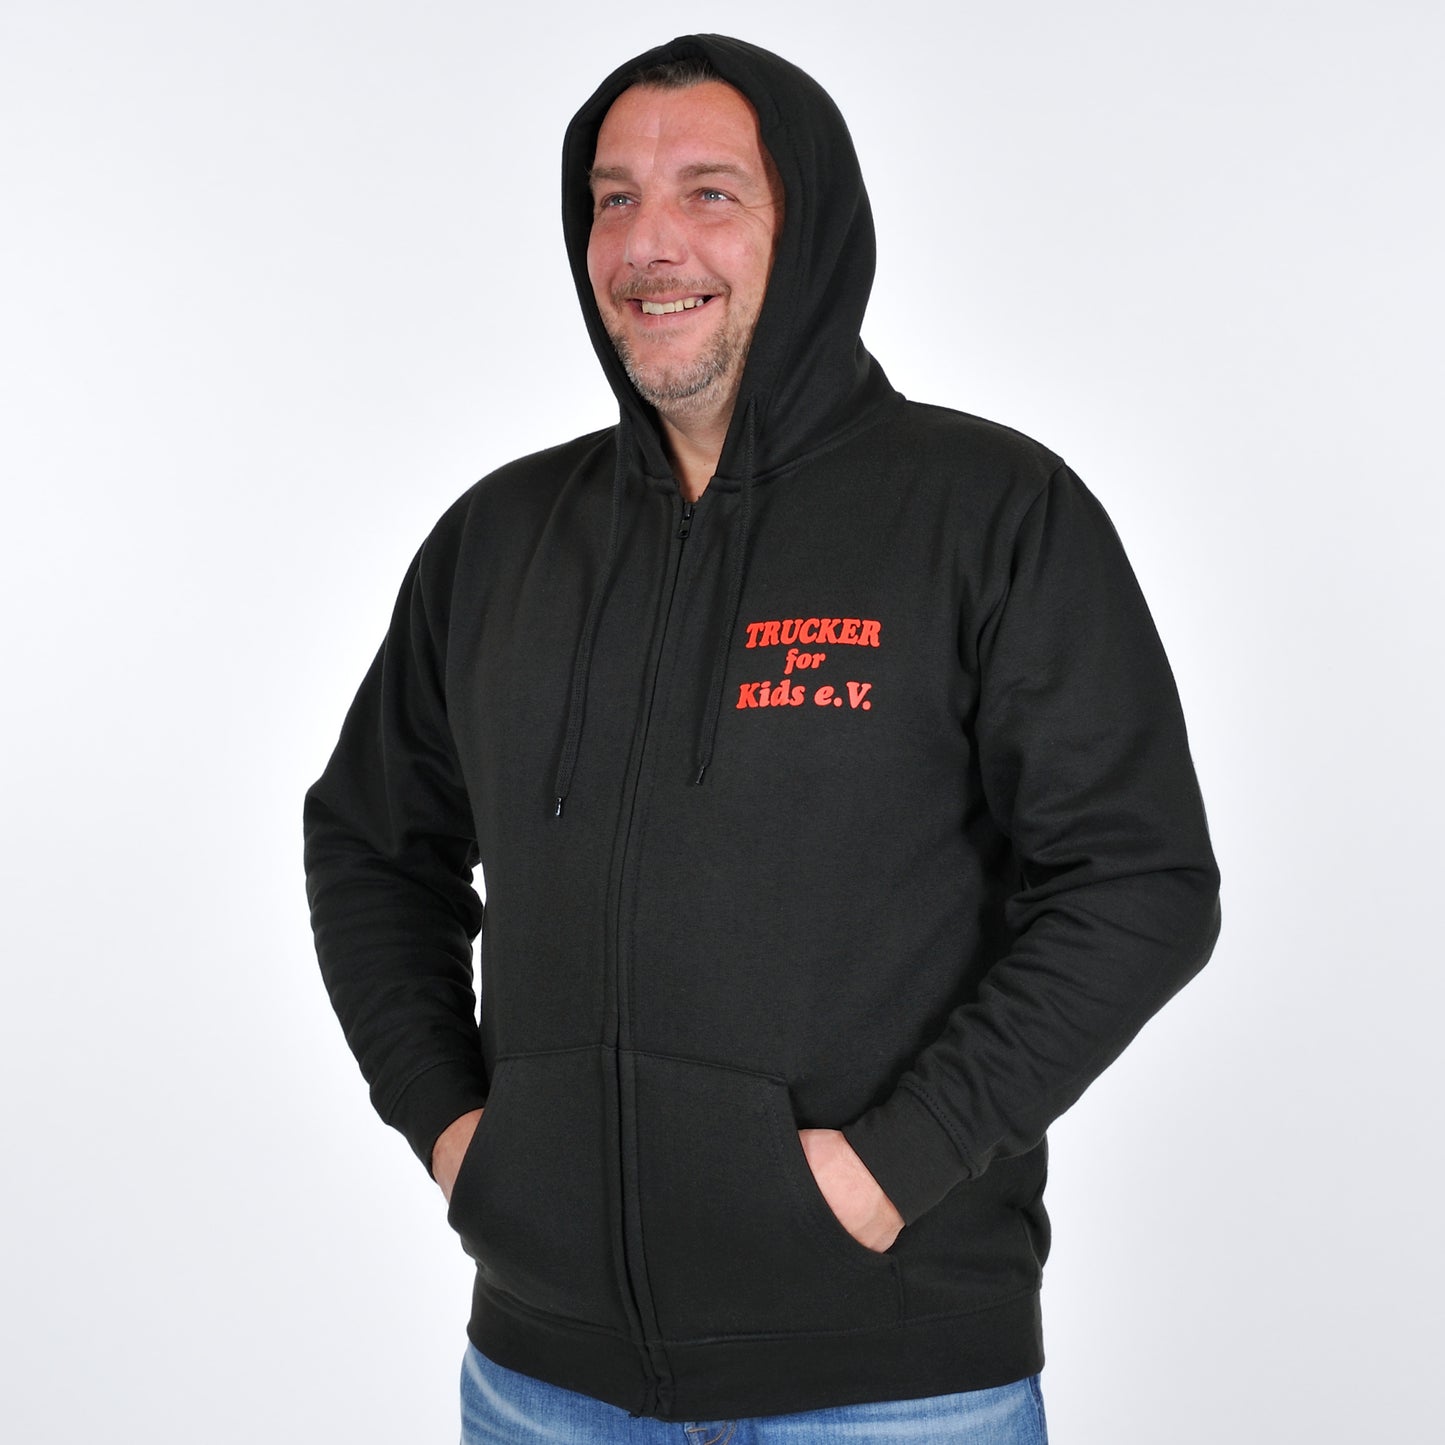 Vereins - Sweats jacket with zipper old price 39,00€ now only 36,50€